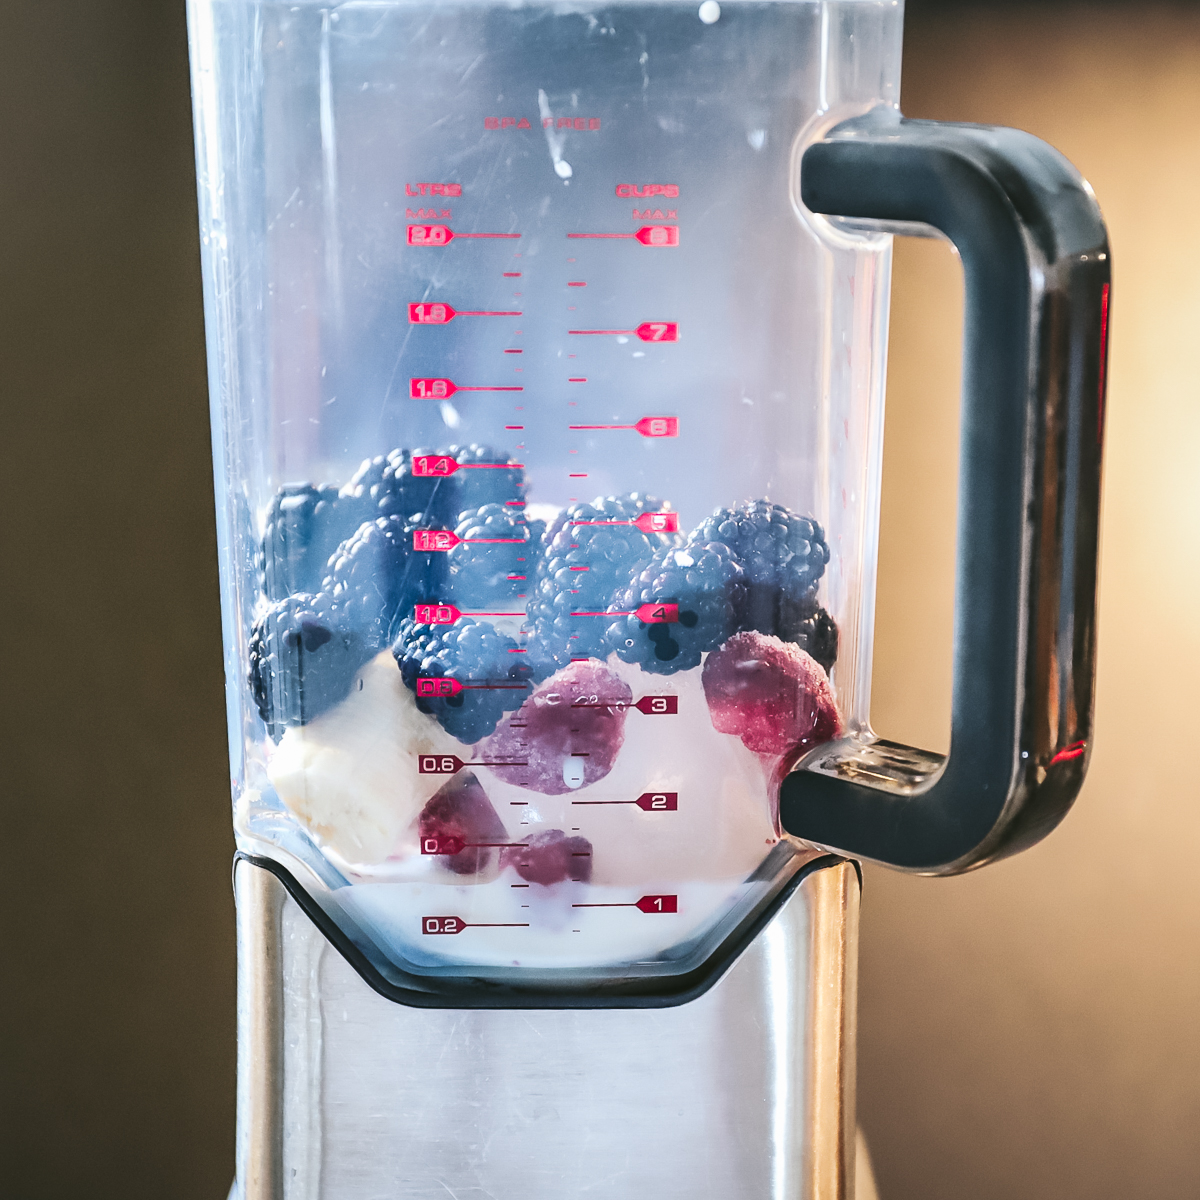 Smoothie step 1 has the bowl of a blender layered with white yogurt, banana, and berries.